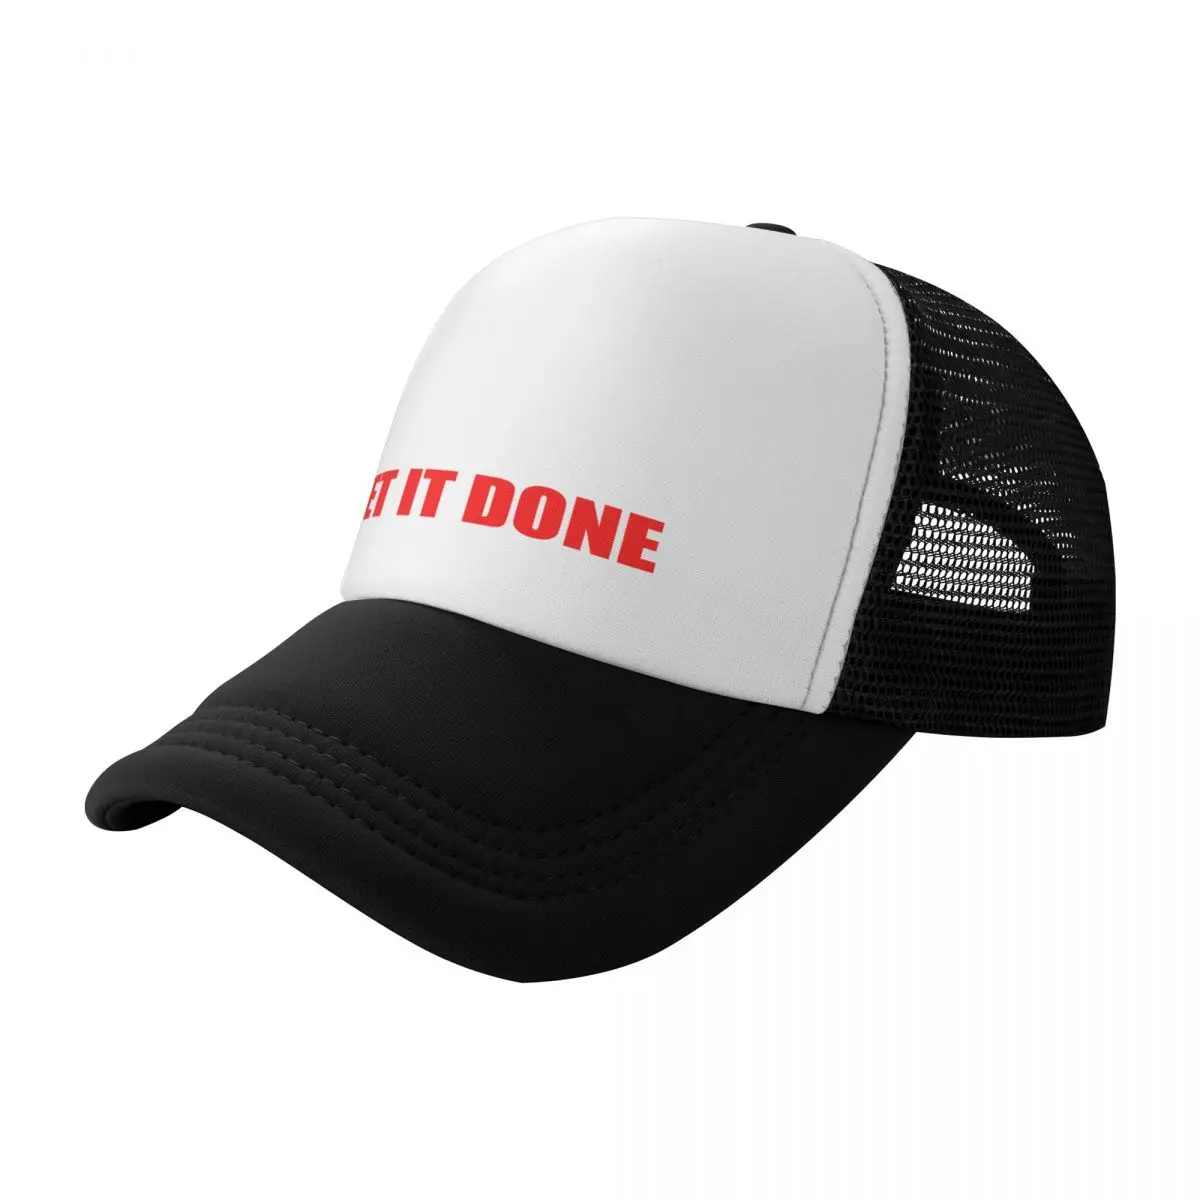 

Where there’s a will, there’s a wayGet it done Baseball Cap Custom Cap Streetwear Hood Snap Back Hat Baseball Men Women's